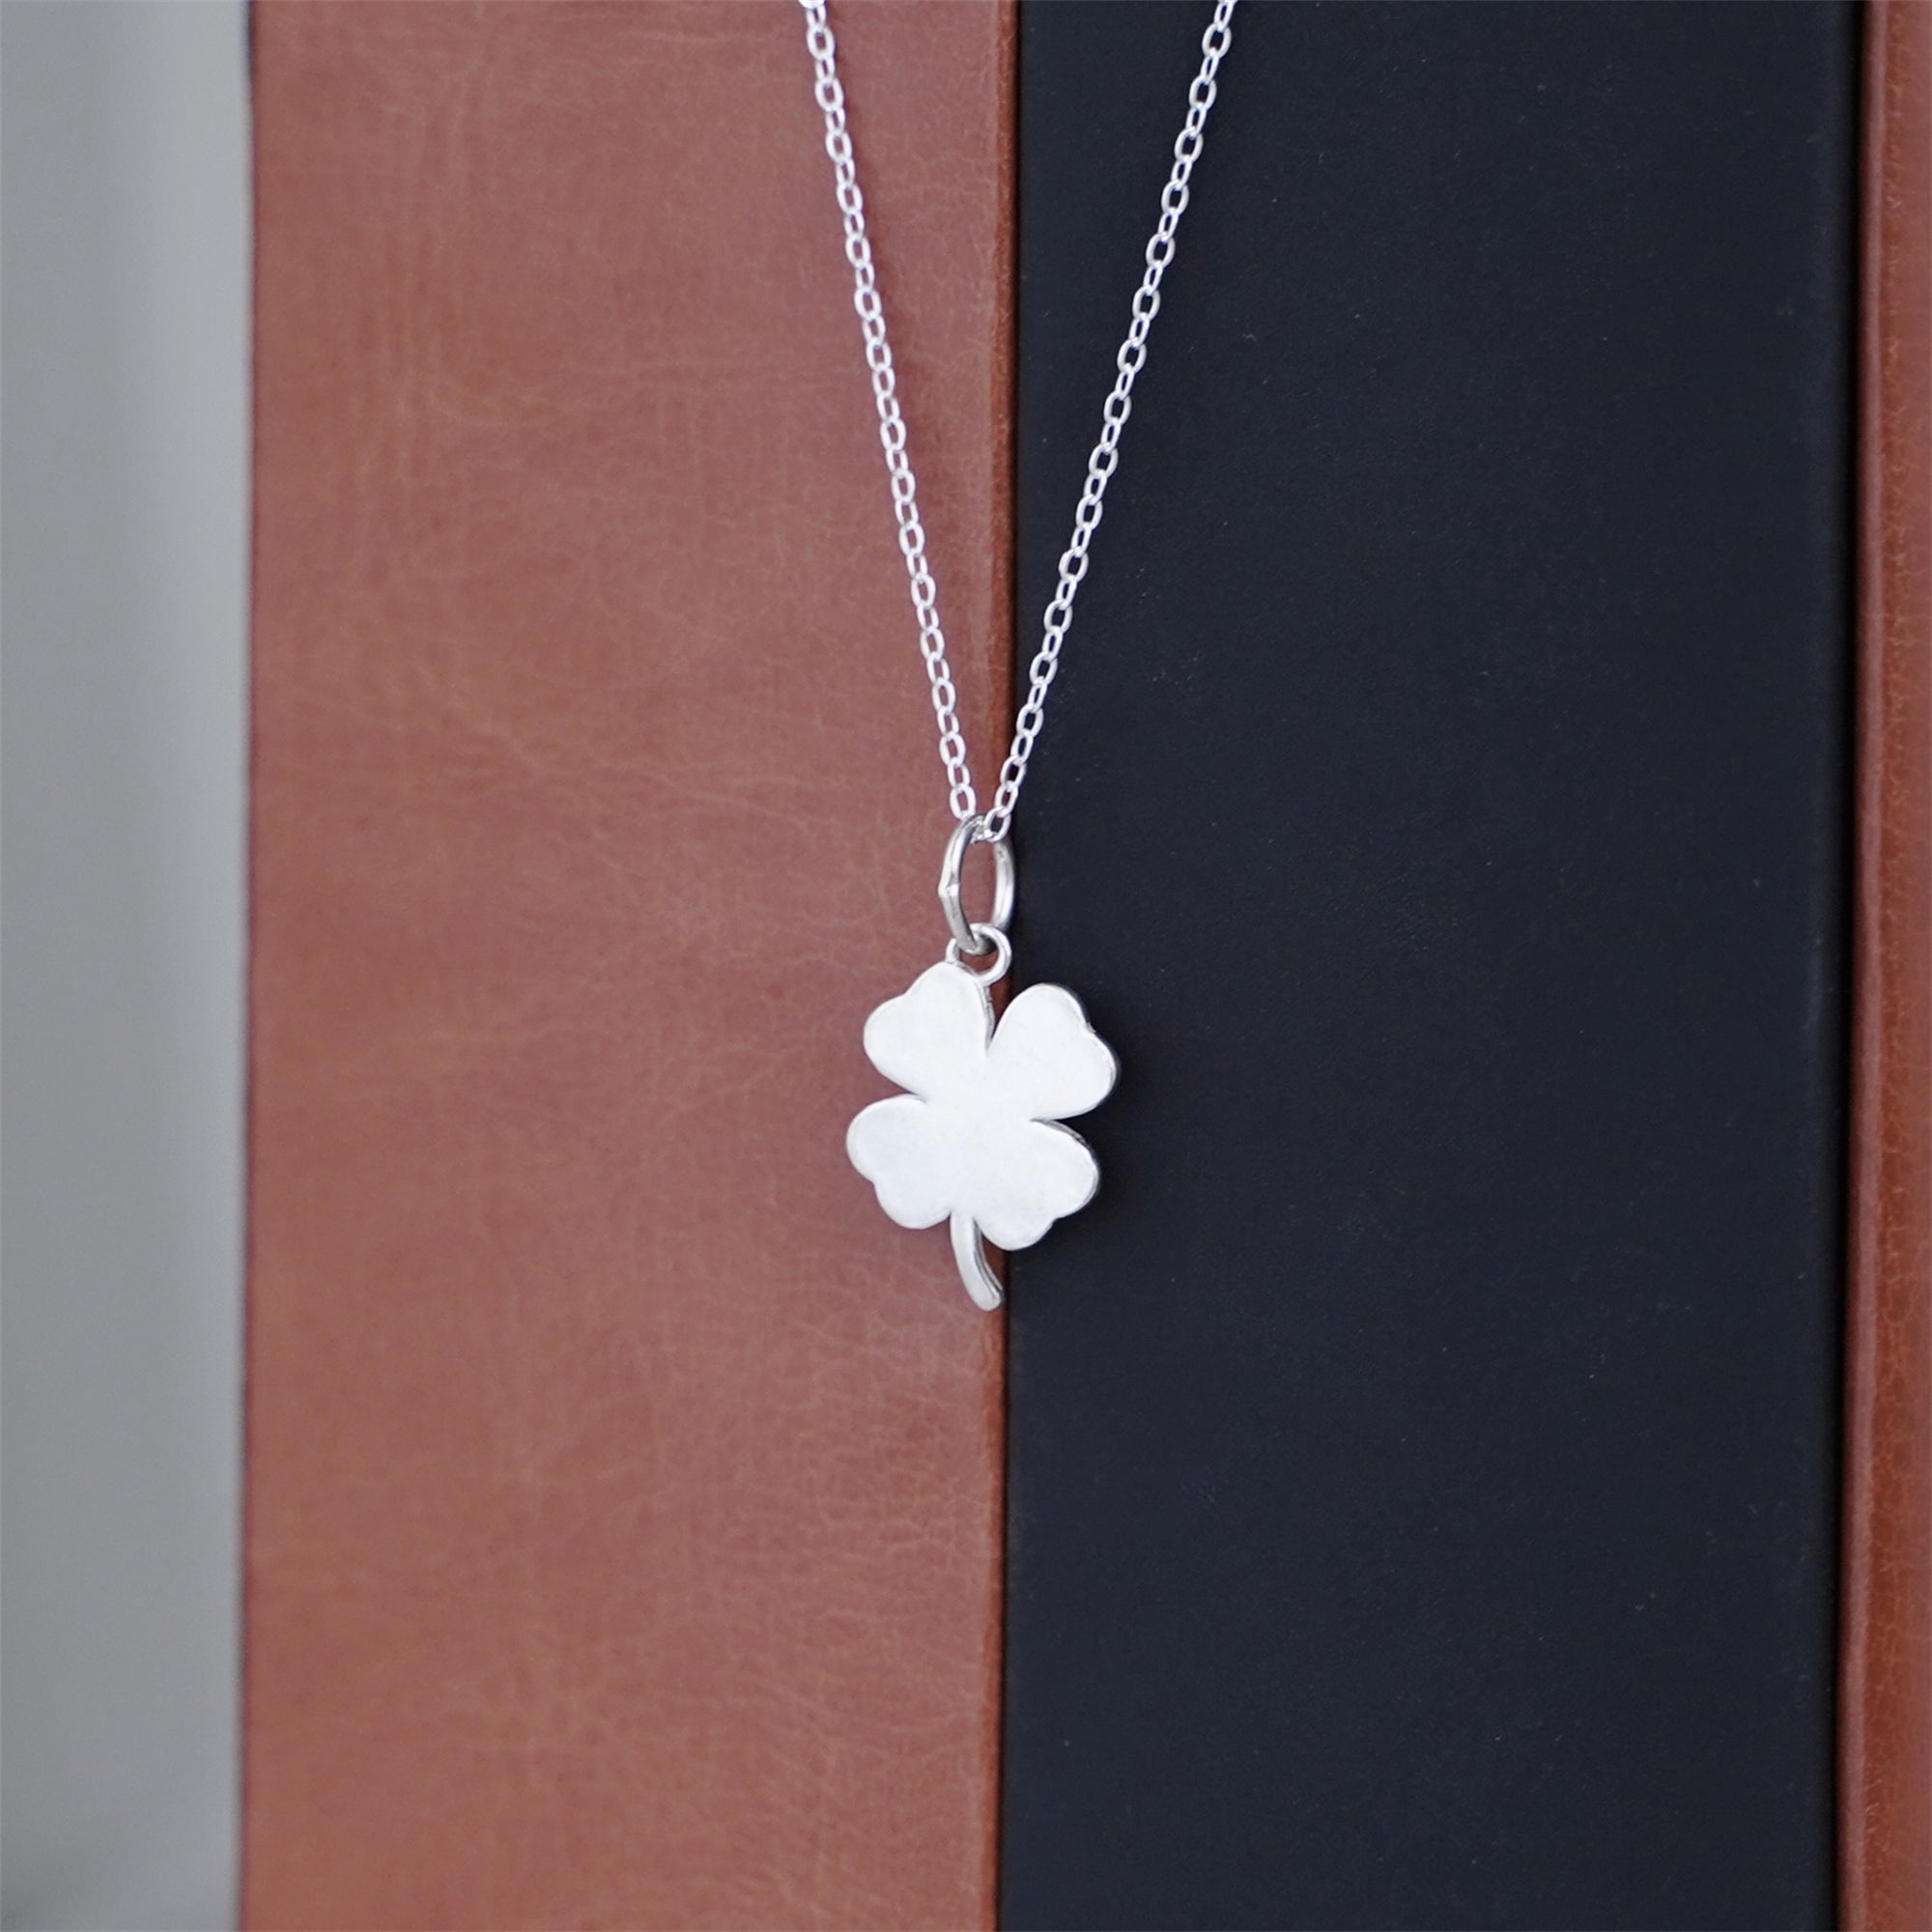 ArtStation - Wear Your Luck in Style with a Silver Four Leaf Clover Necklace